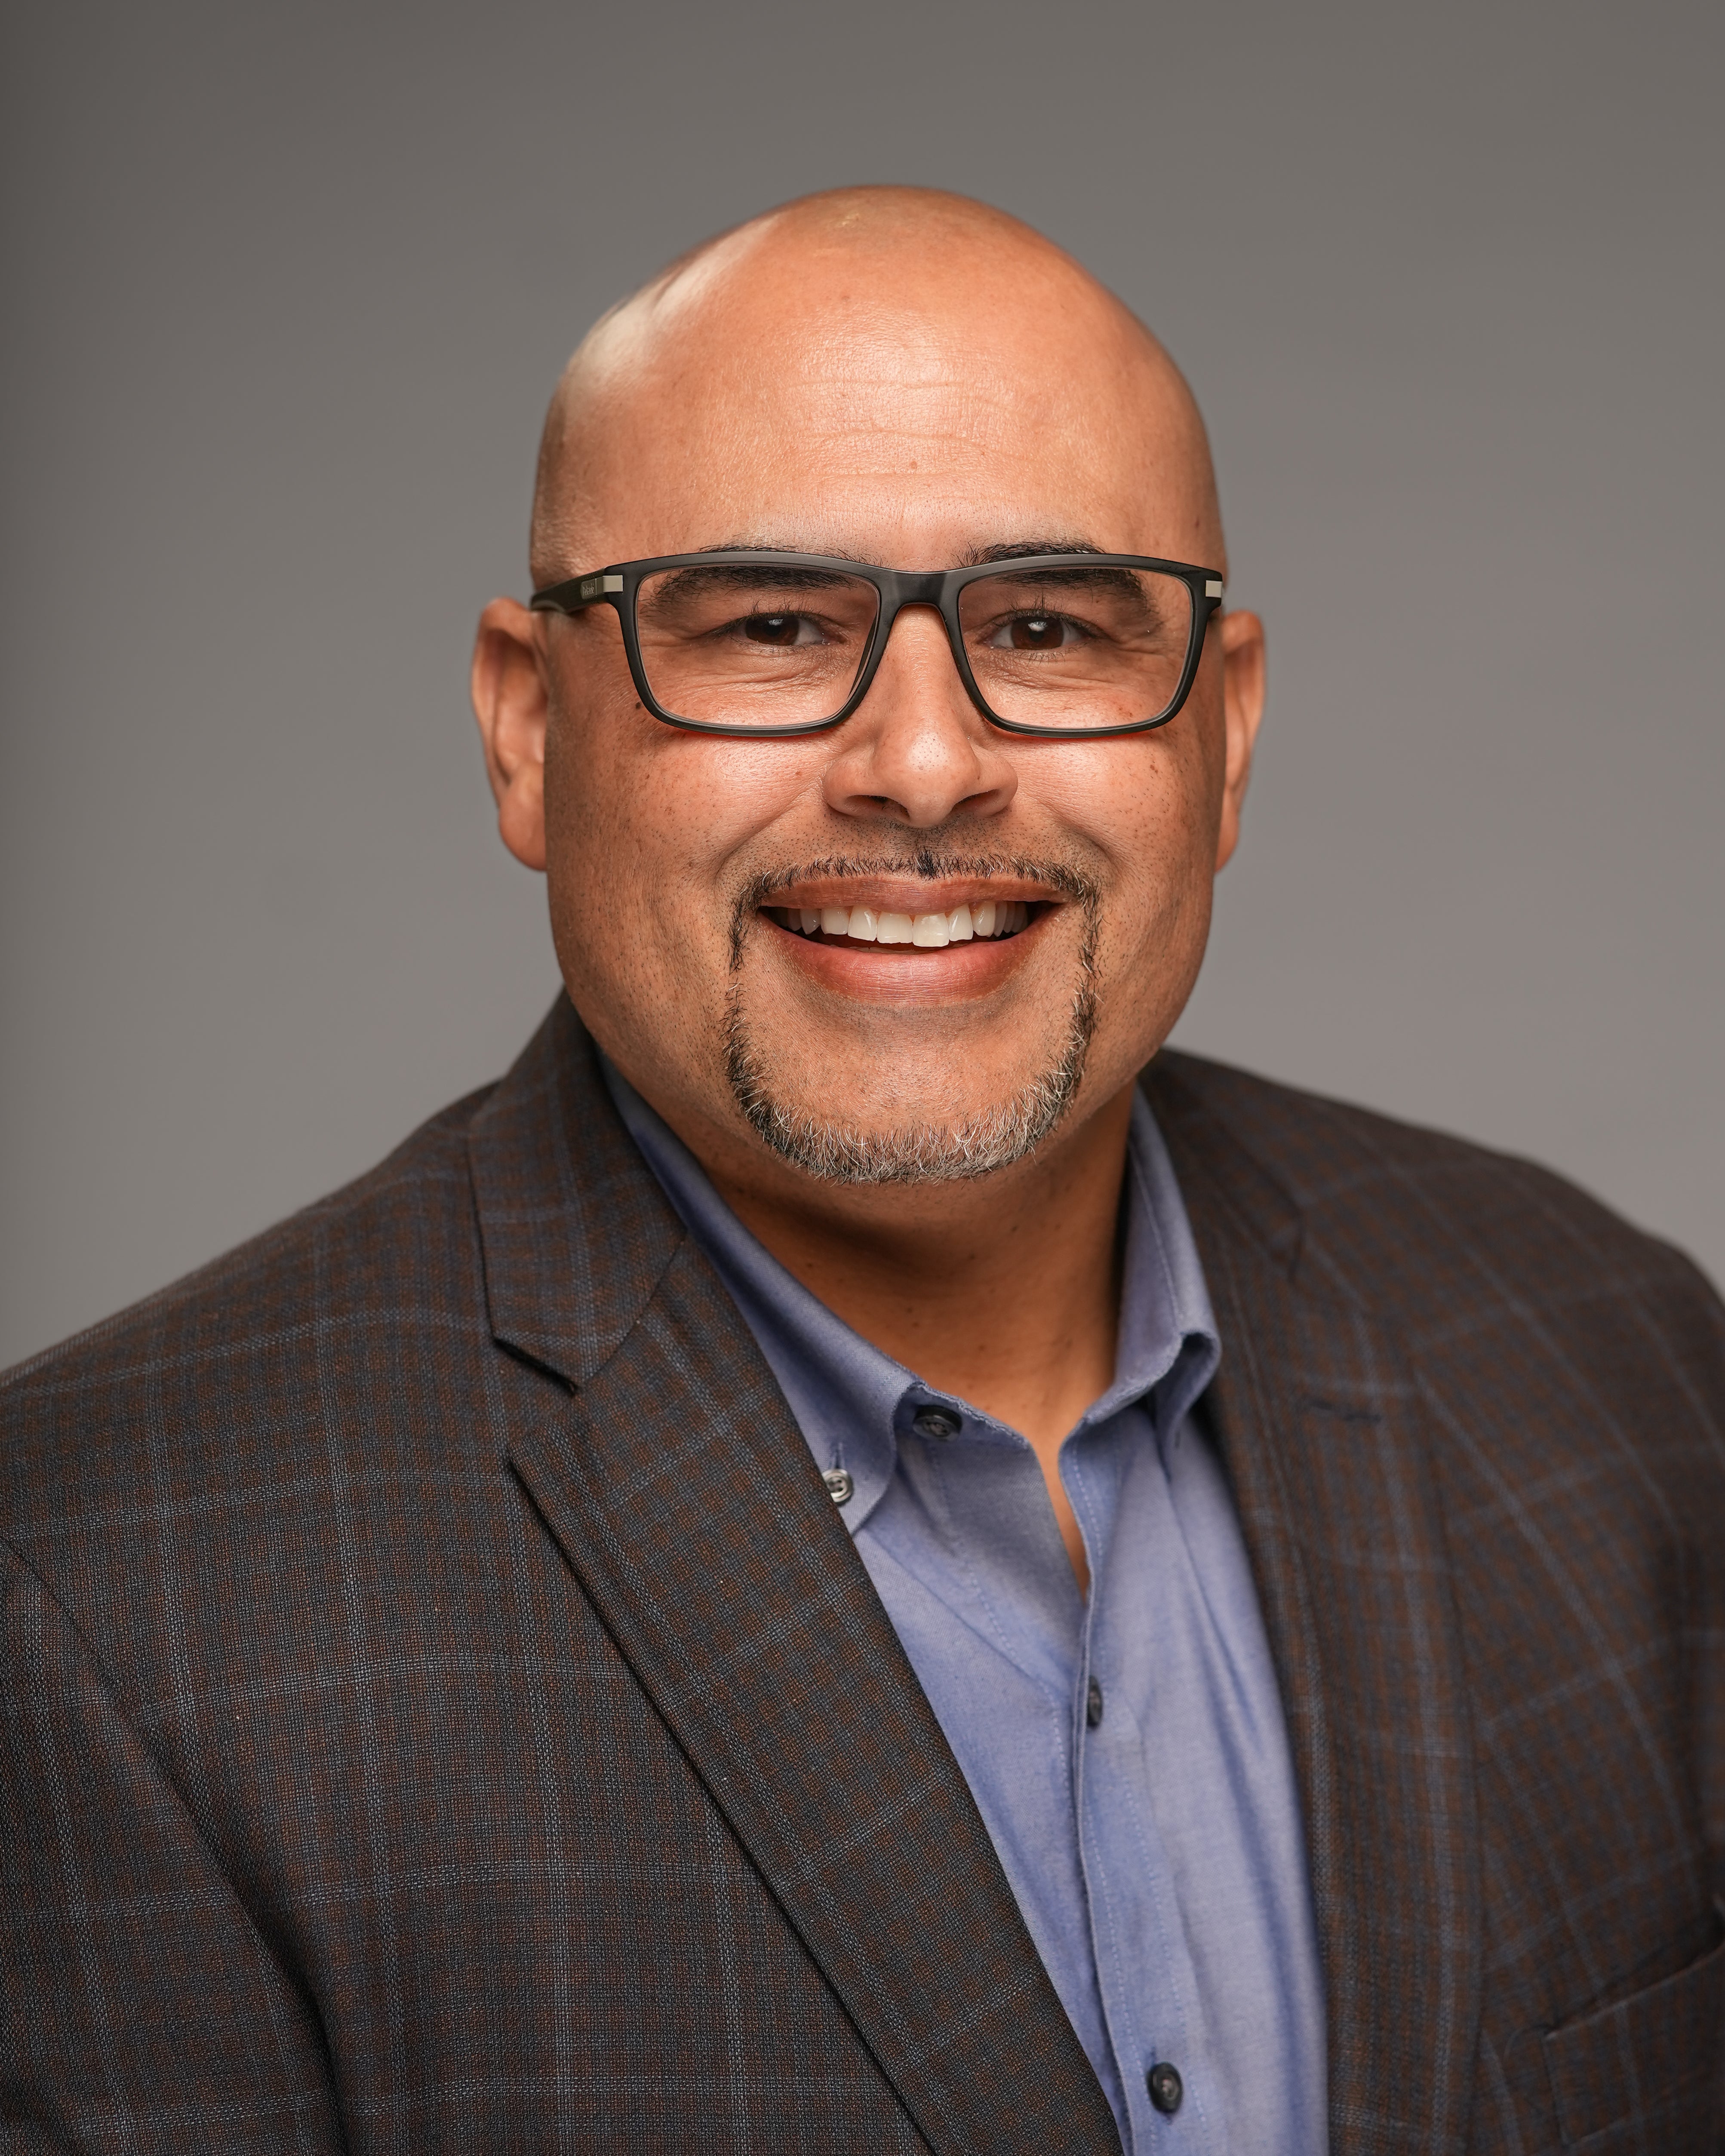 Jon T. Locklear, President and CEO